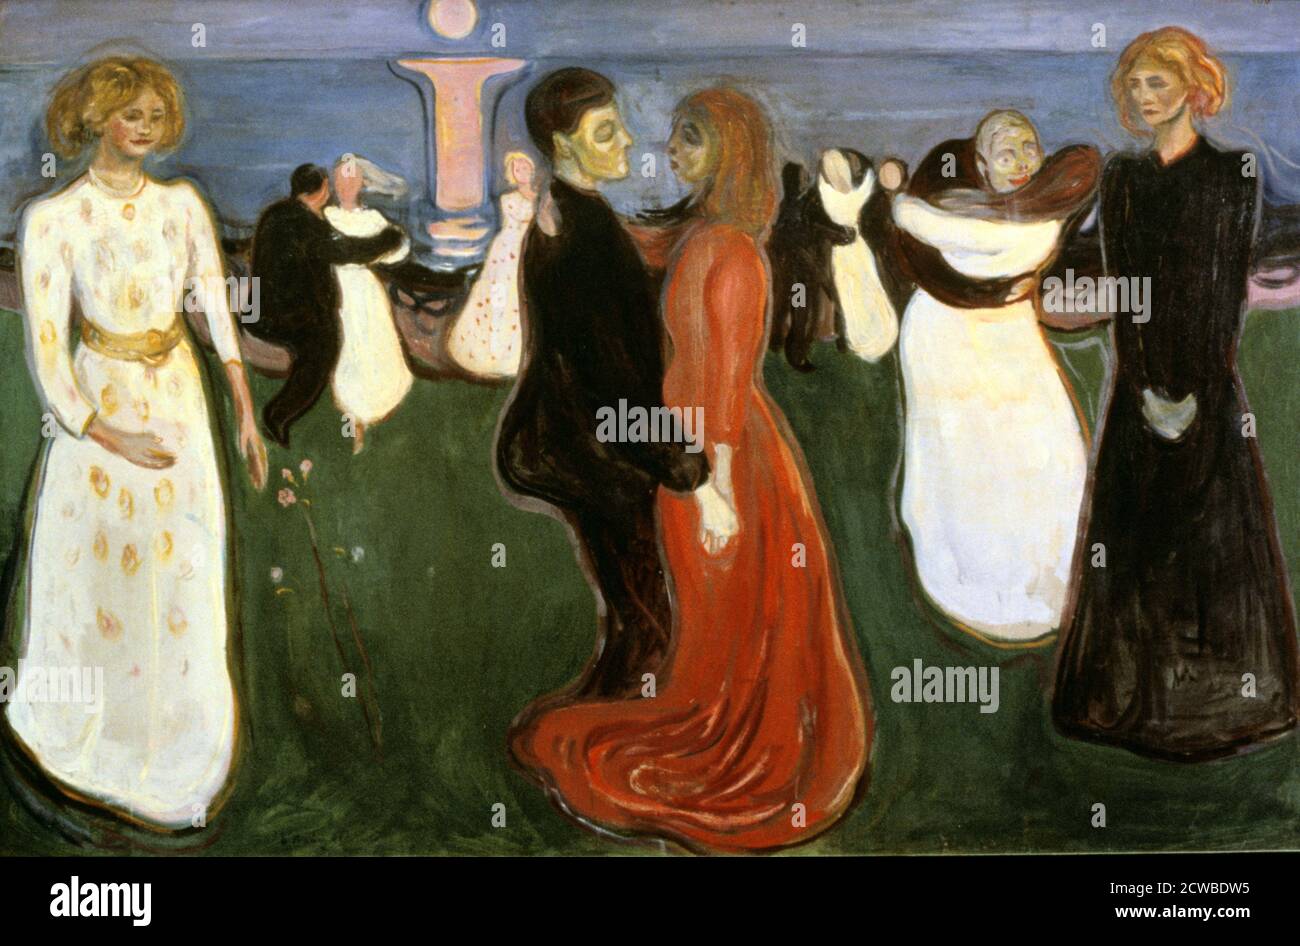 The Dance of Life', 1899-1900. Artist: Edvard Munch. Edvard Munch is a Norwegian born, expressionist painter, and printer. He played a great role in German expressionism. Stock Photo